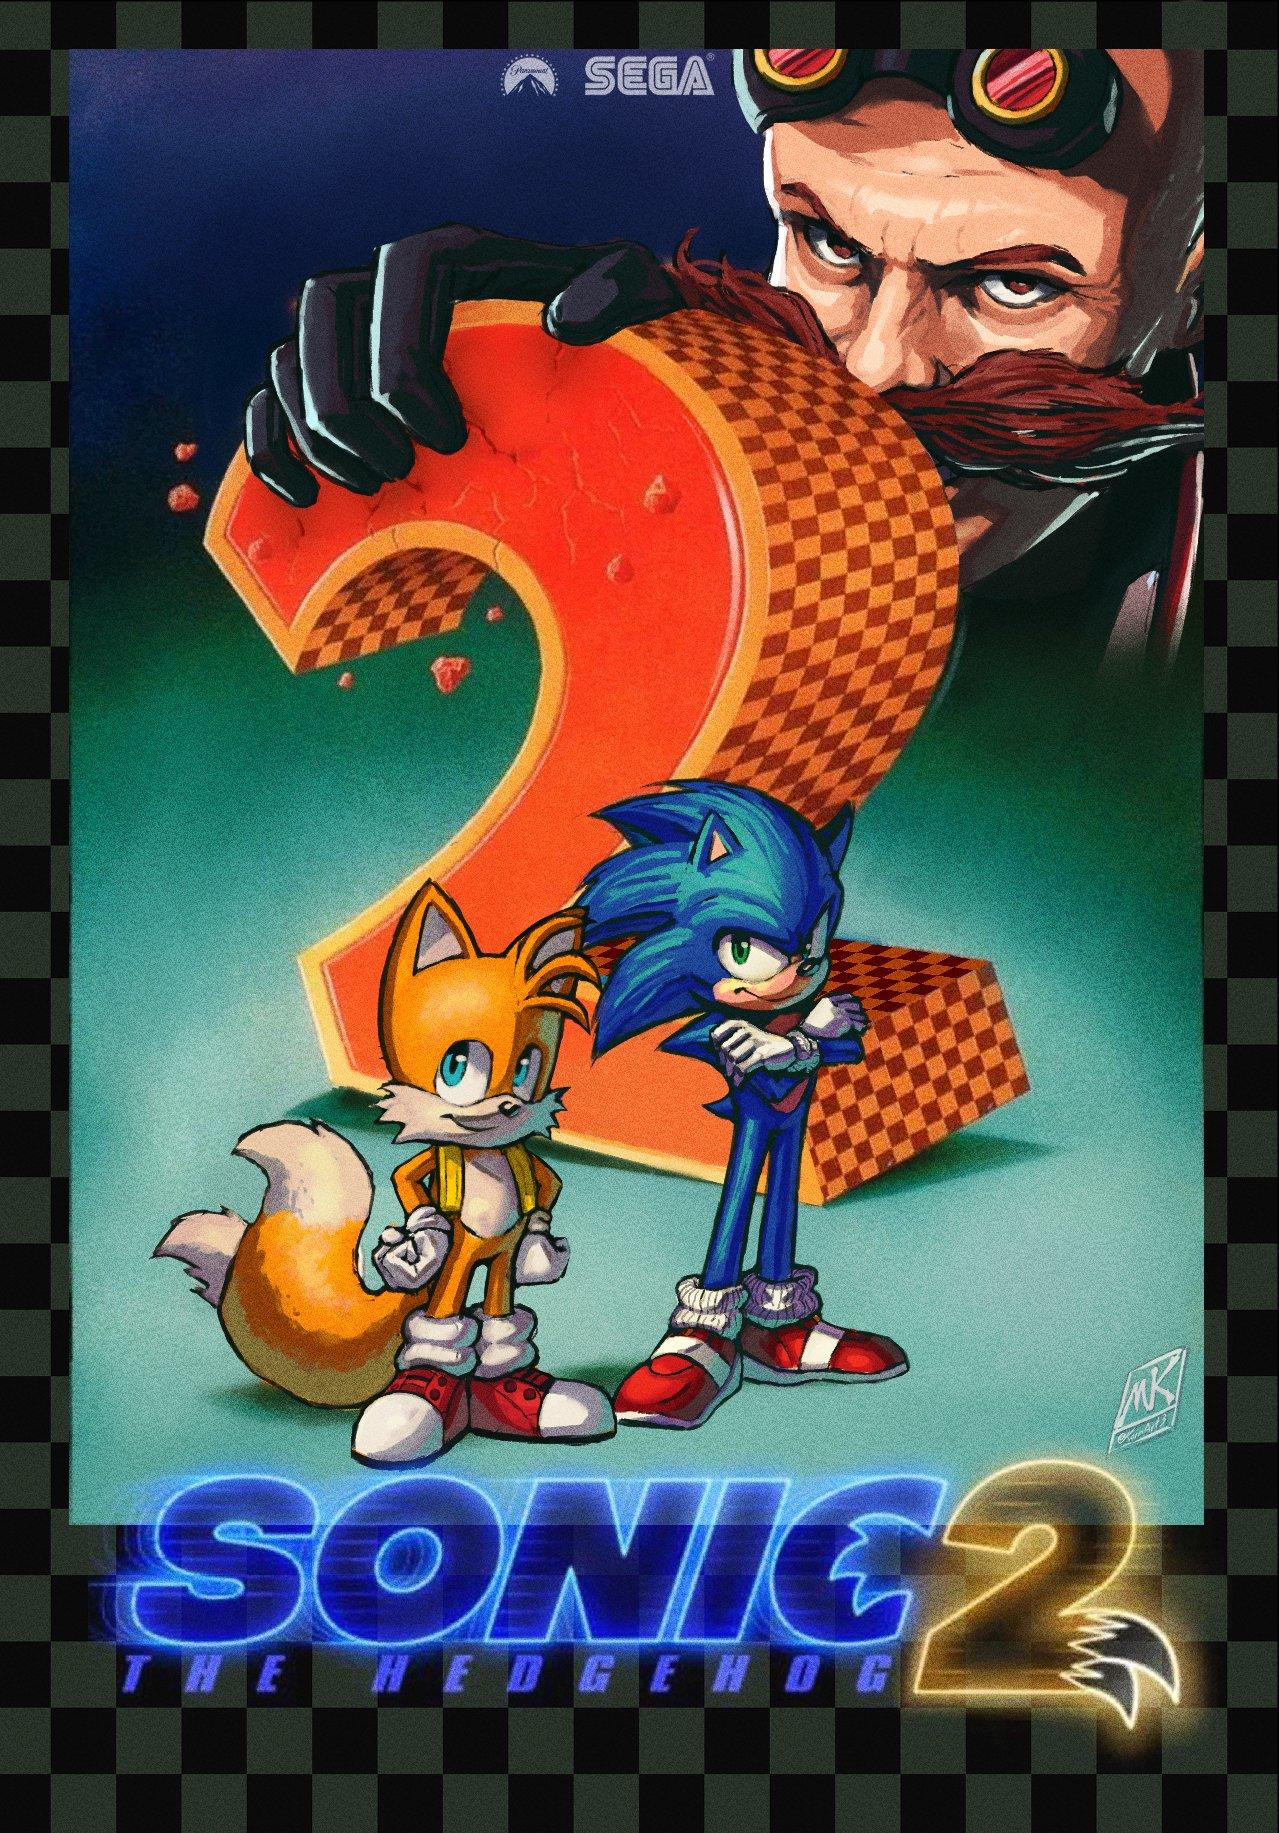 Poster. Sonic the Hedgehog 2 (2022 Film)